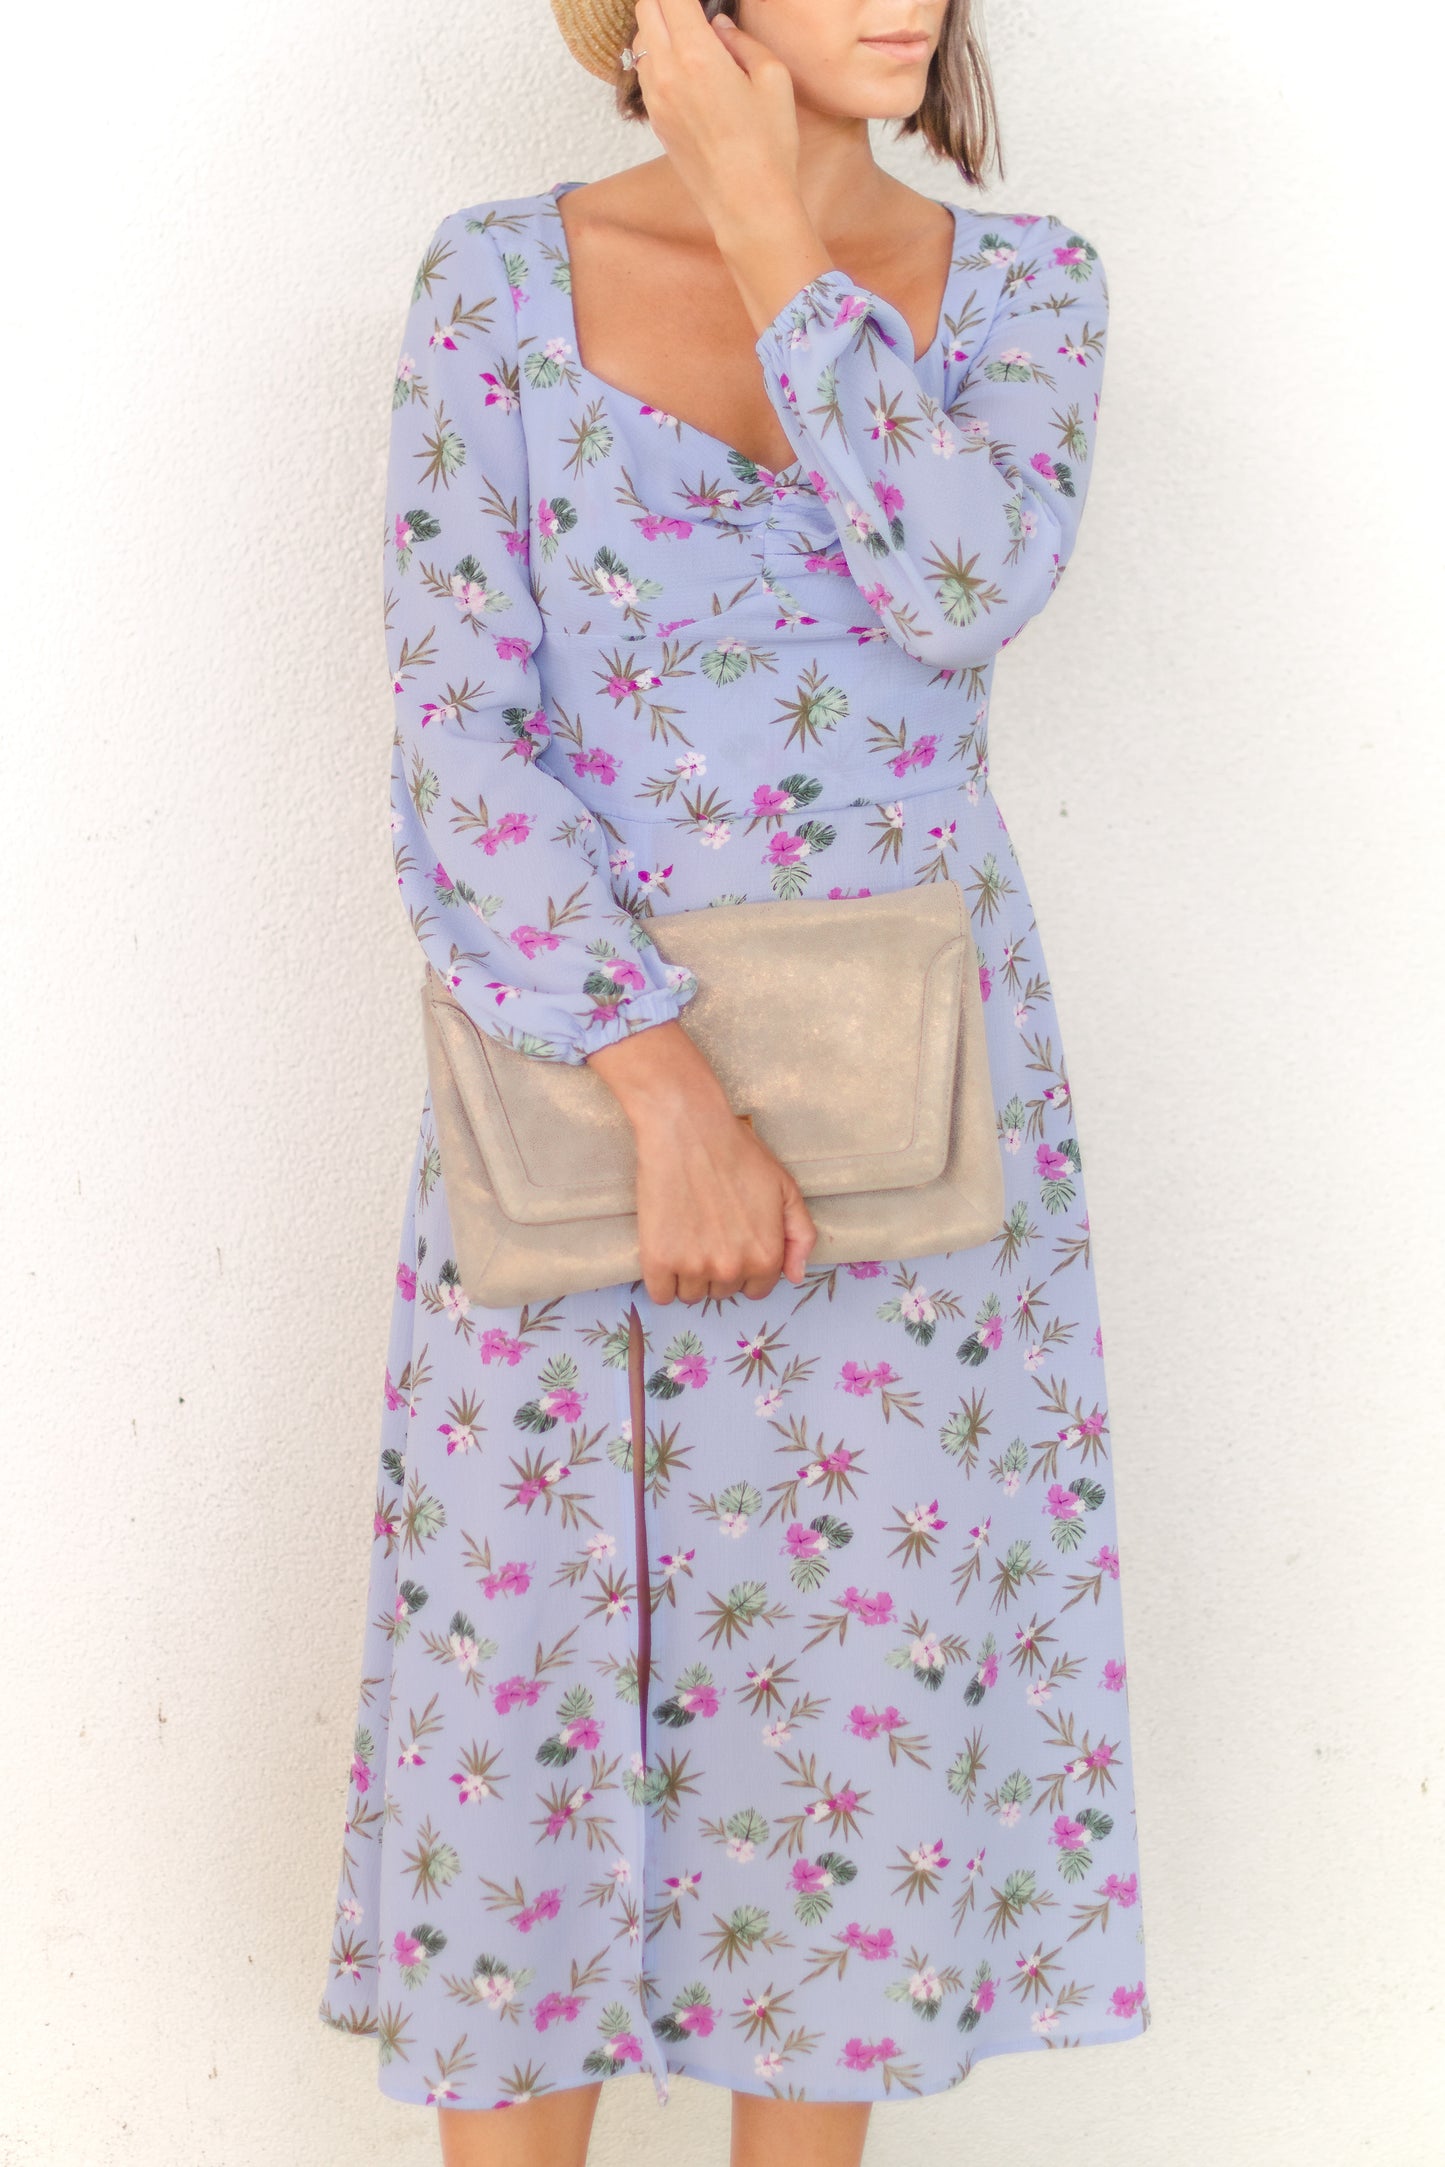 Ethical and sustainable clothing made in Canada - Pros and Cons Apparel. Eloise Dress- Blue floral A line dress. Medium length with long billowy sleeves and elastic sleeve opening. Midi skirt has loose flowing shape and high slit. Bodice includes gathered front and sweetheart neckline.